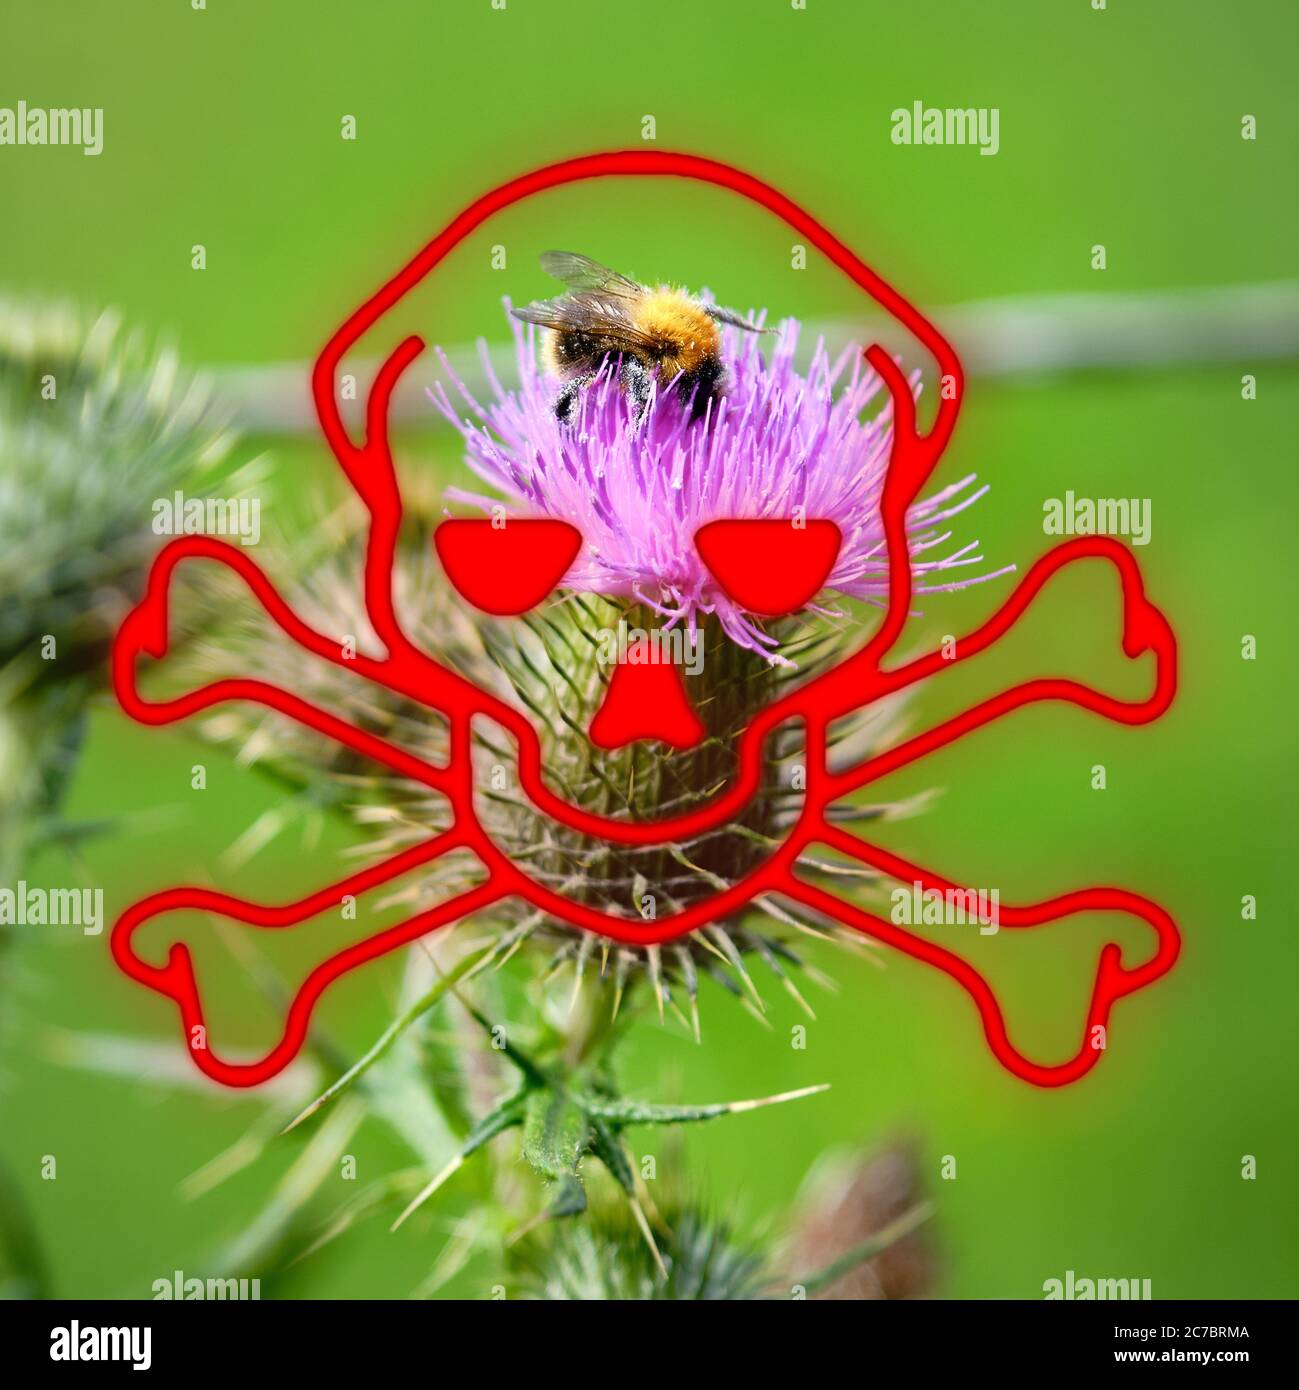 Skull hazard symbol overlay blooming thistle with a bumblebee, Bombus,full of pollen. Pesticides risk to wild bees and honeybees, Netherlands, EU Stock Photo